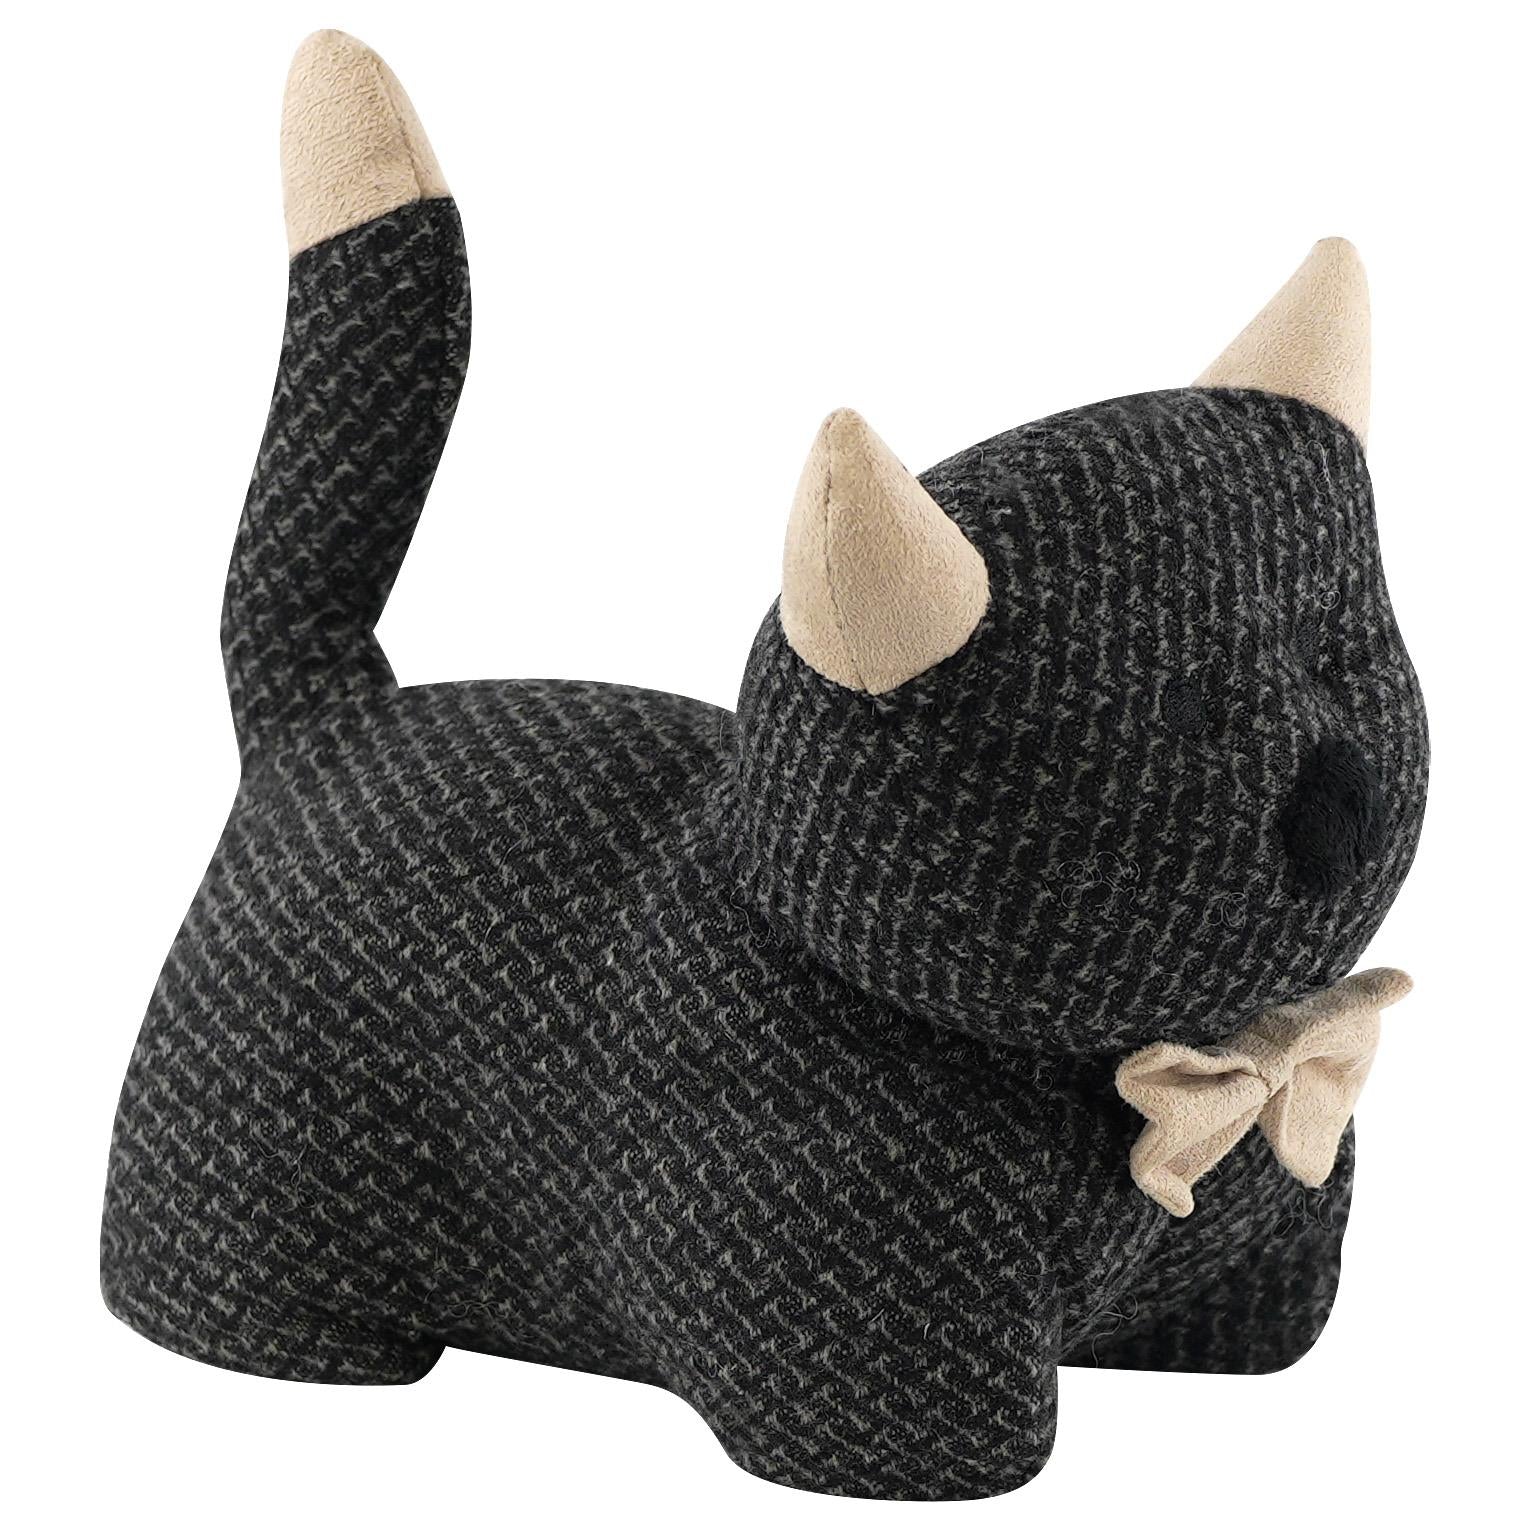 Fabric Kitten Door Stopper by The Magic Toy Shop - UKBuyZone